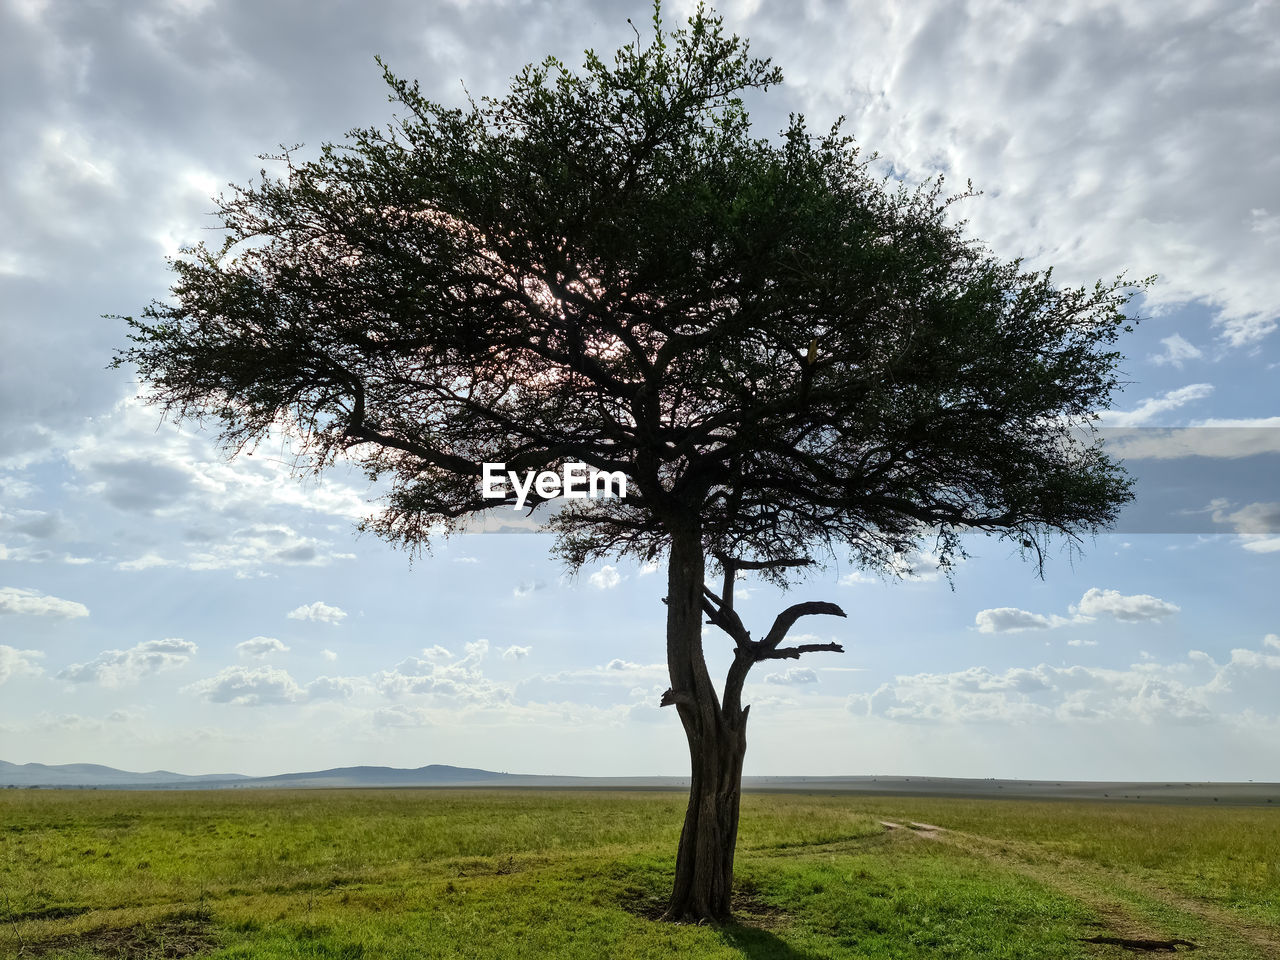 plant, tree, sky, cloud, landscape, environment, nature, grass, savanna, single tree, beauty in nature, land, scenics - nature, field, tranquility, plain, cloudscape, no people, tranquil scene, horizon, rural area, rural scene, hill, non-urban scene, outdoors, horizon over land, tree trunk, green, trunk, grassland, growth, dramatic sky, flower, idyllic, meadow, day, blue, travel, travel destinations, natural environment